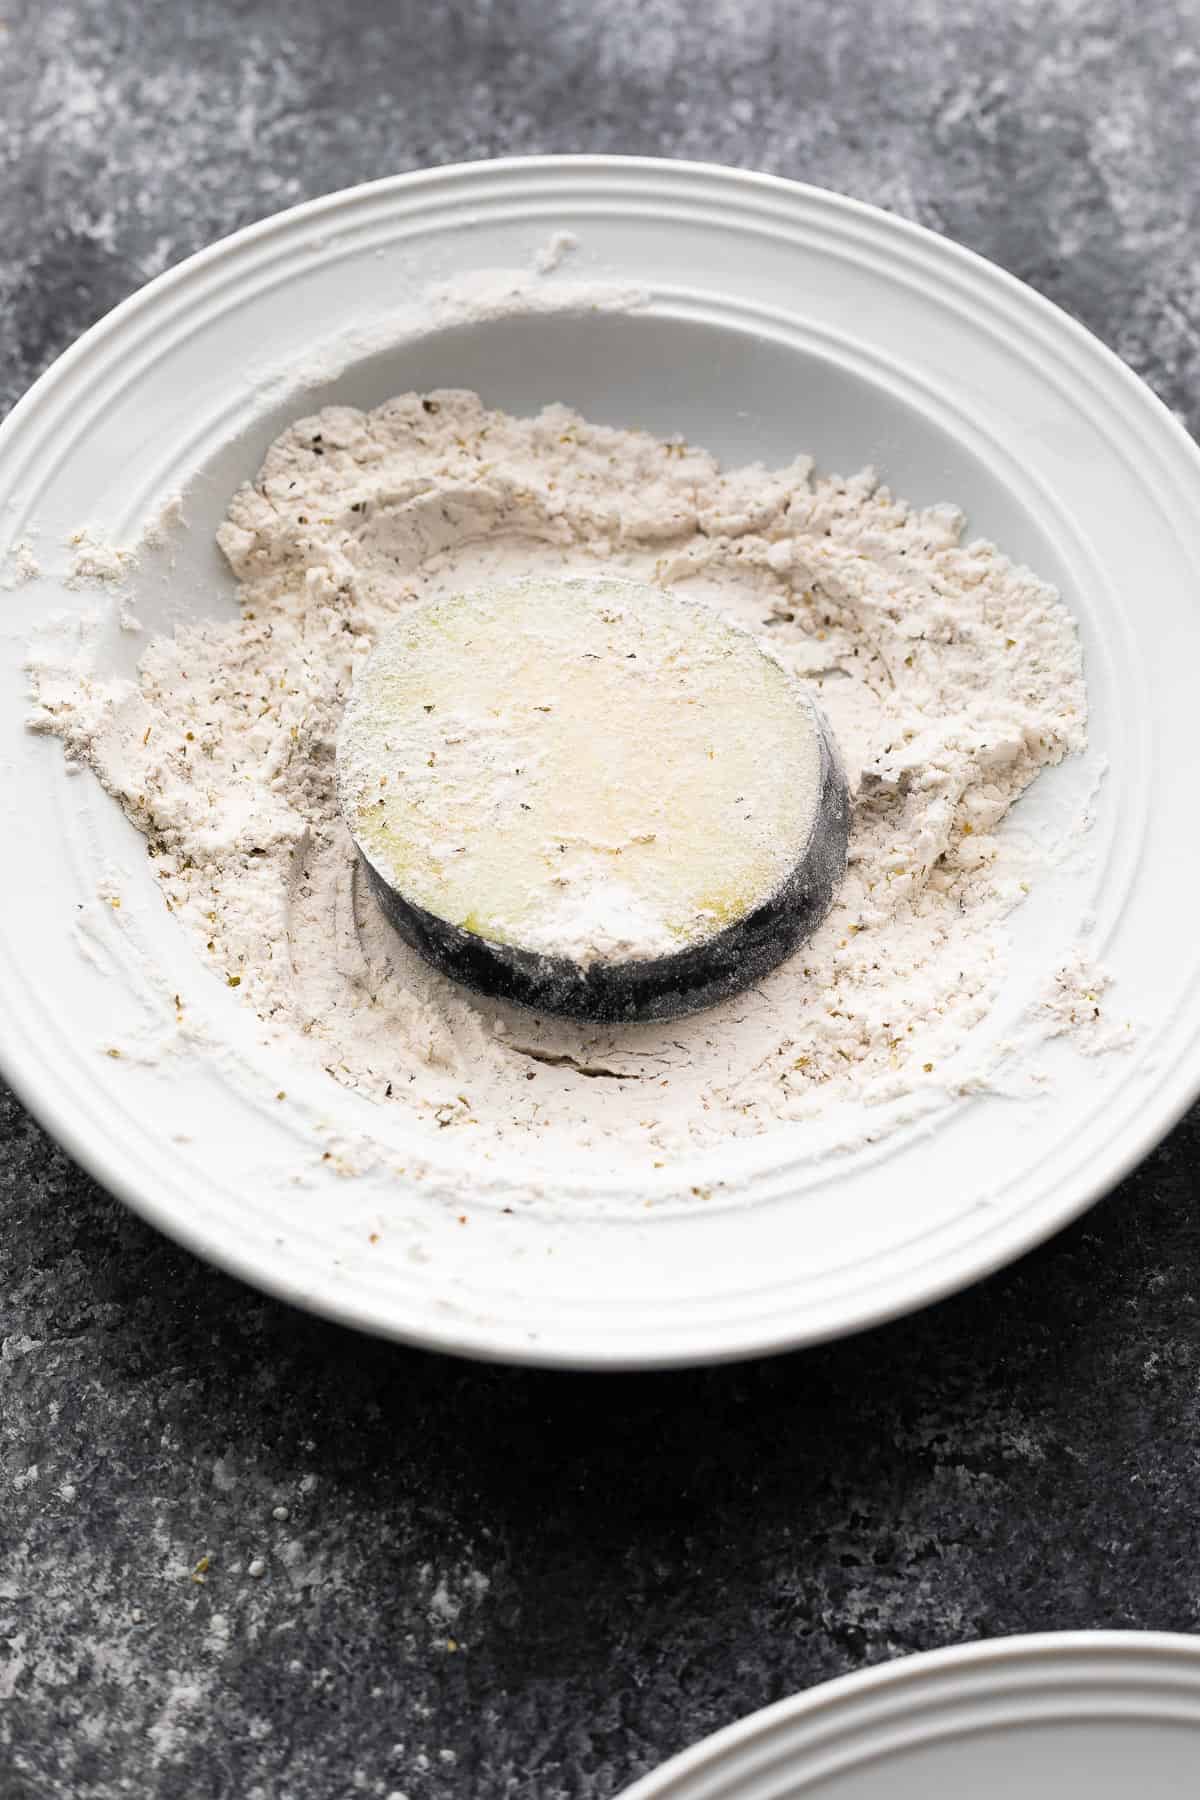 eggplant slice coated in flour mixture in a white bowl